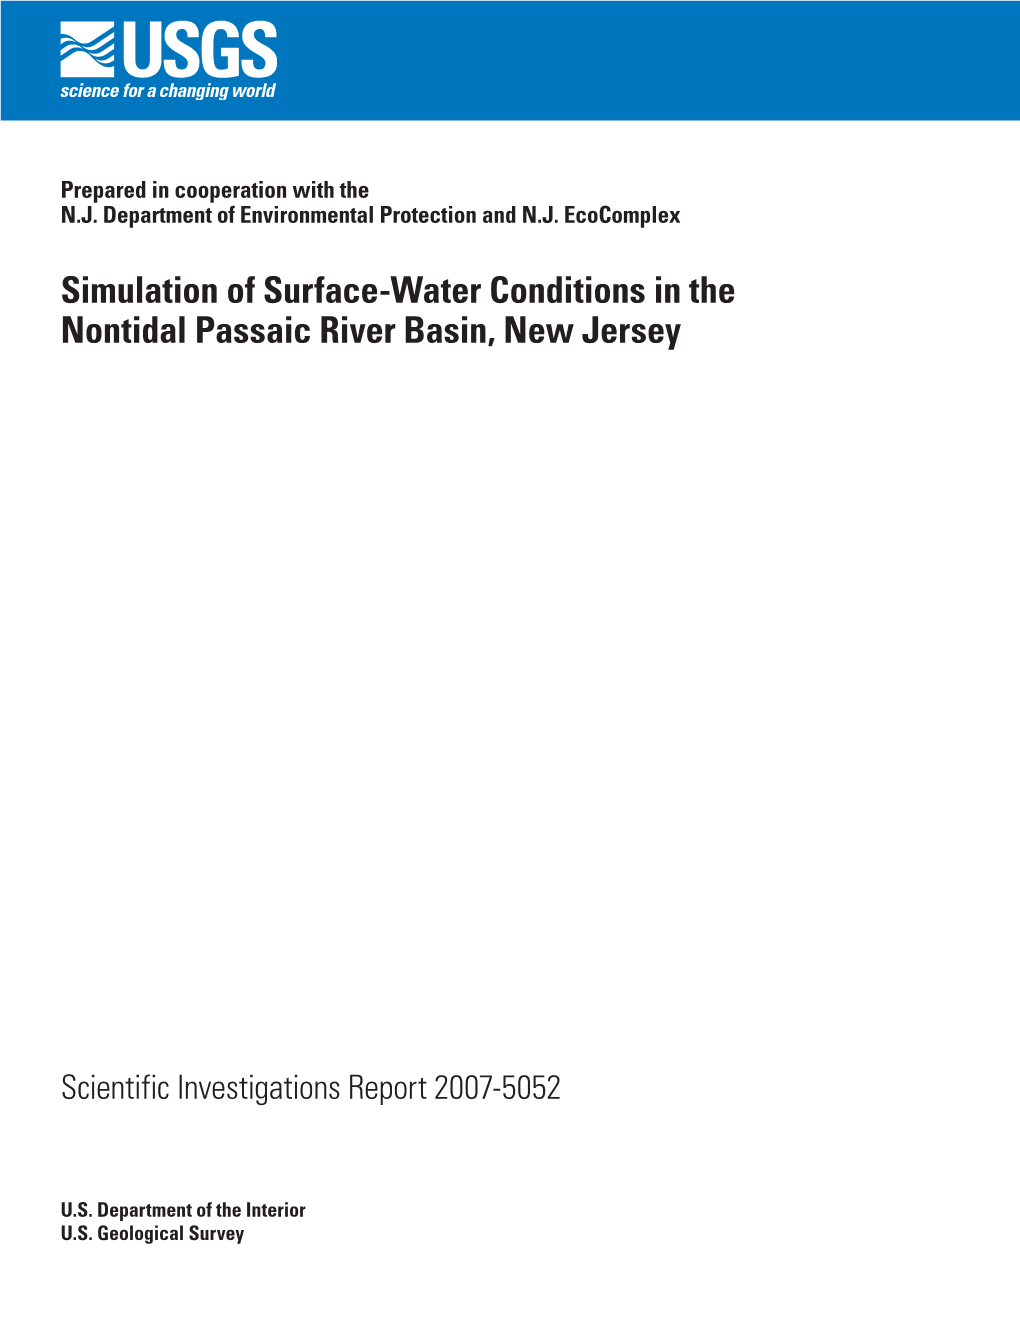 Simulation of Surface-Water Conditions in the Nontidal Passaic River Basin, New Jersey